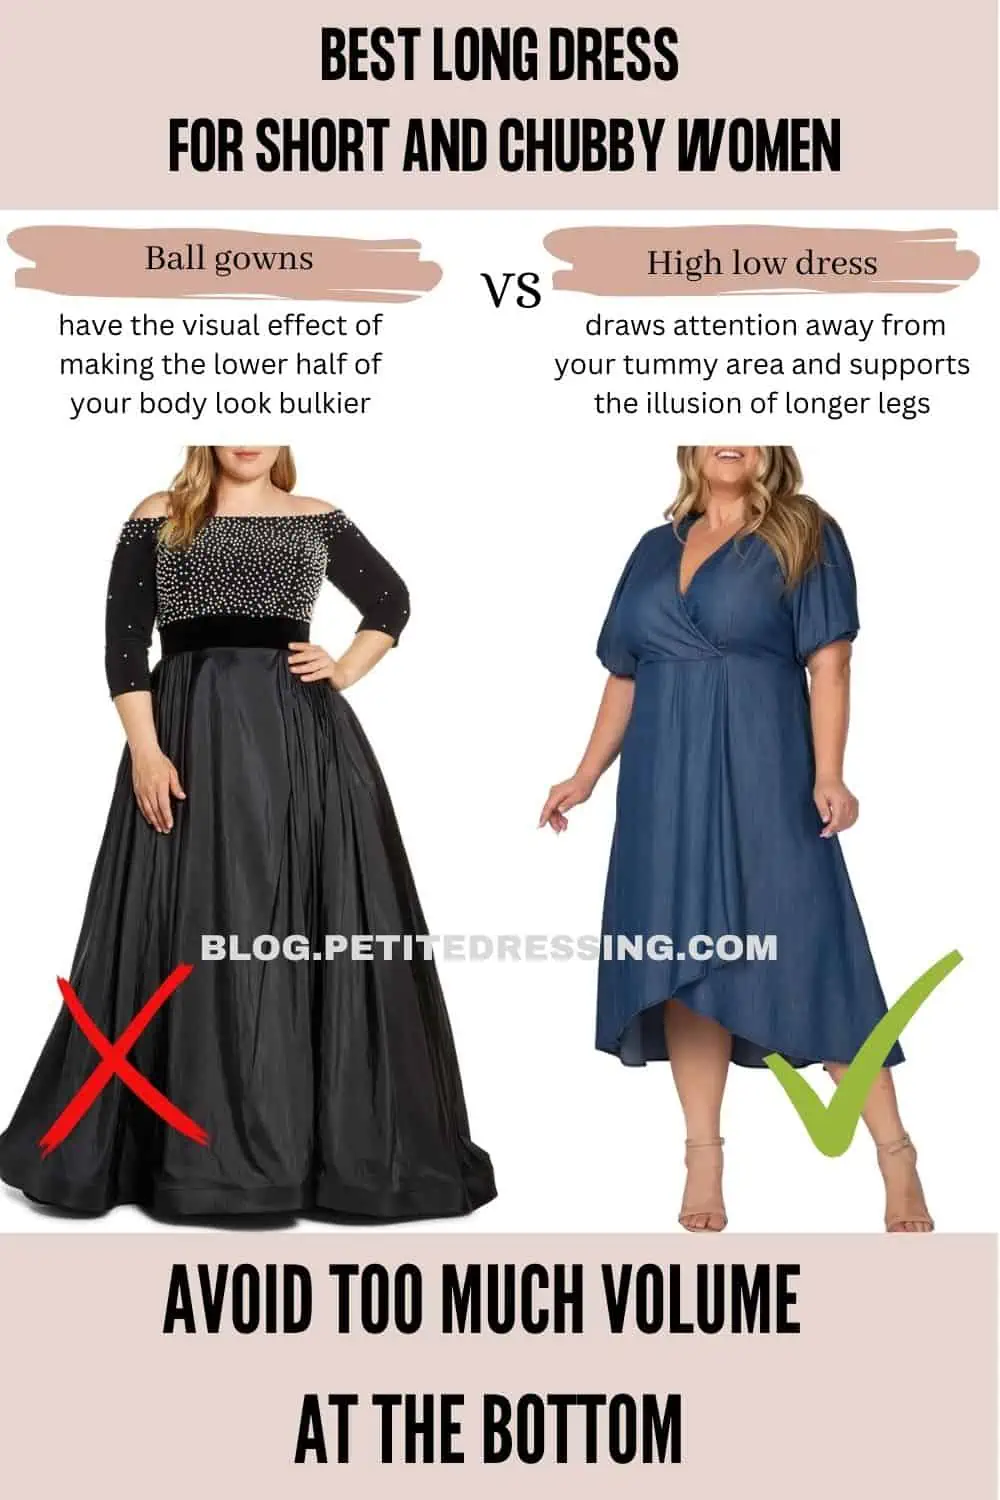 The Long Dress Guide for Short and Chubby Women - Petite Dressing